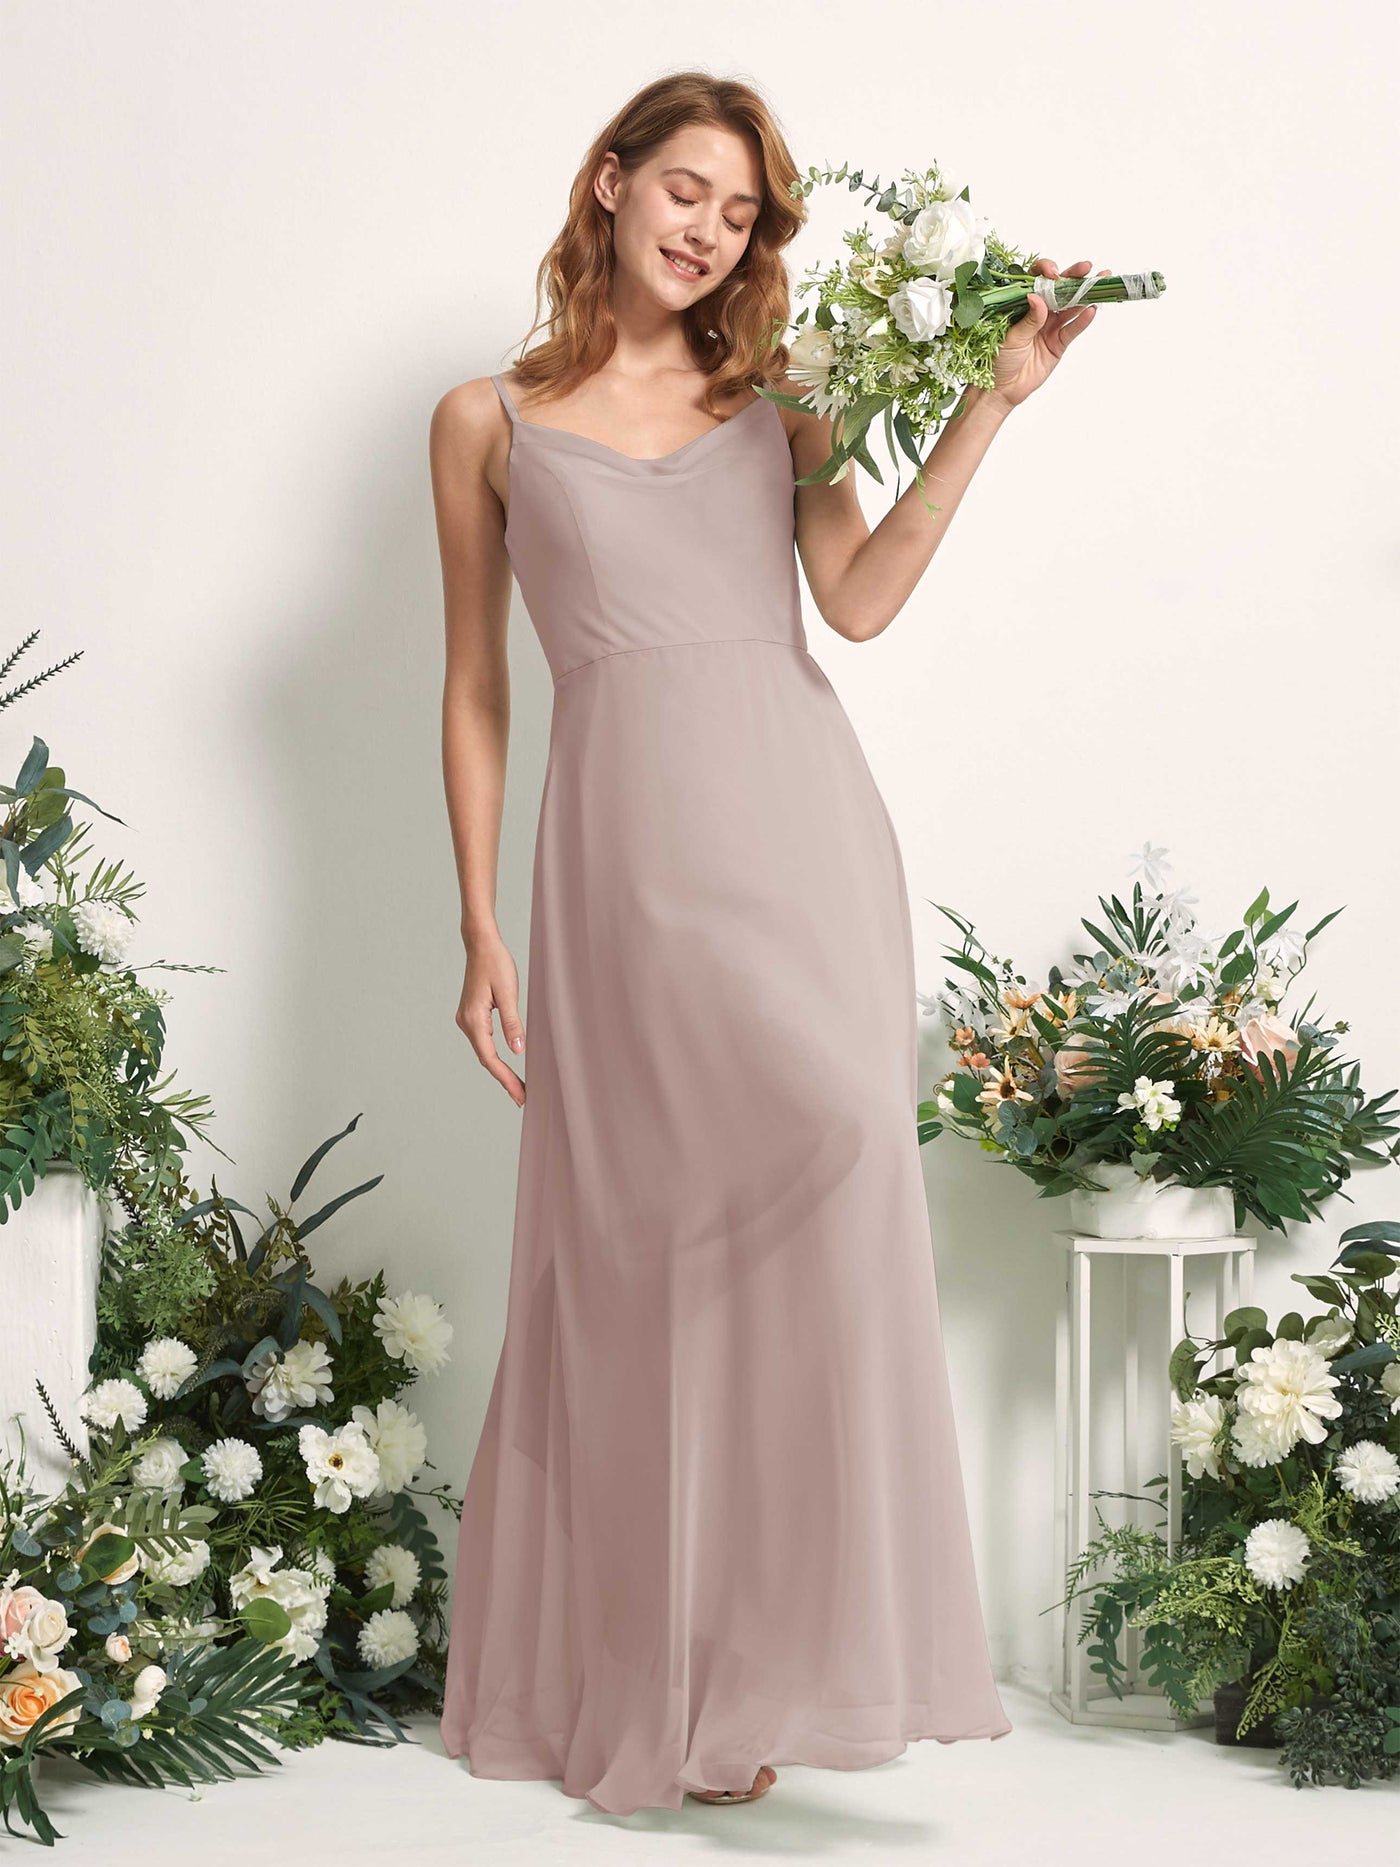 Bridesmaid Dress A-line Chiffon Spaghetti-straps Full Length Sleeveless Wedding Party Dress - Taupe (81227224)#color_taupe